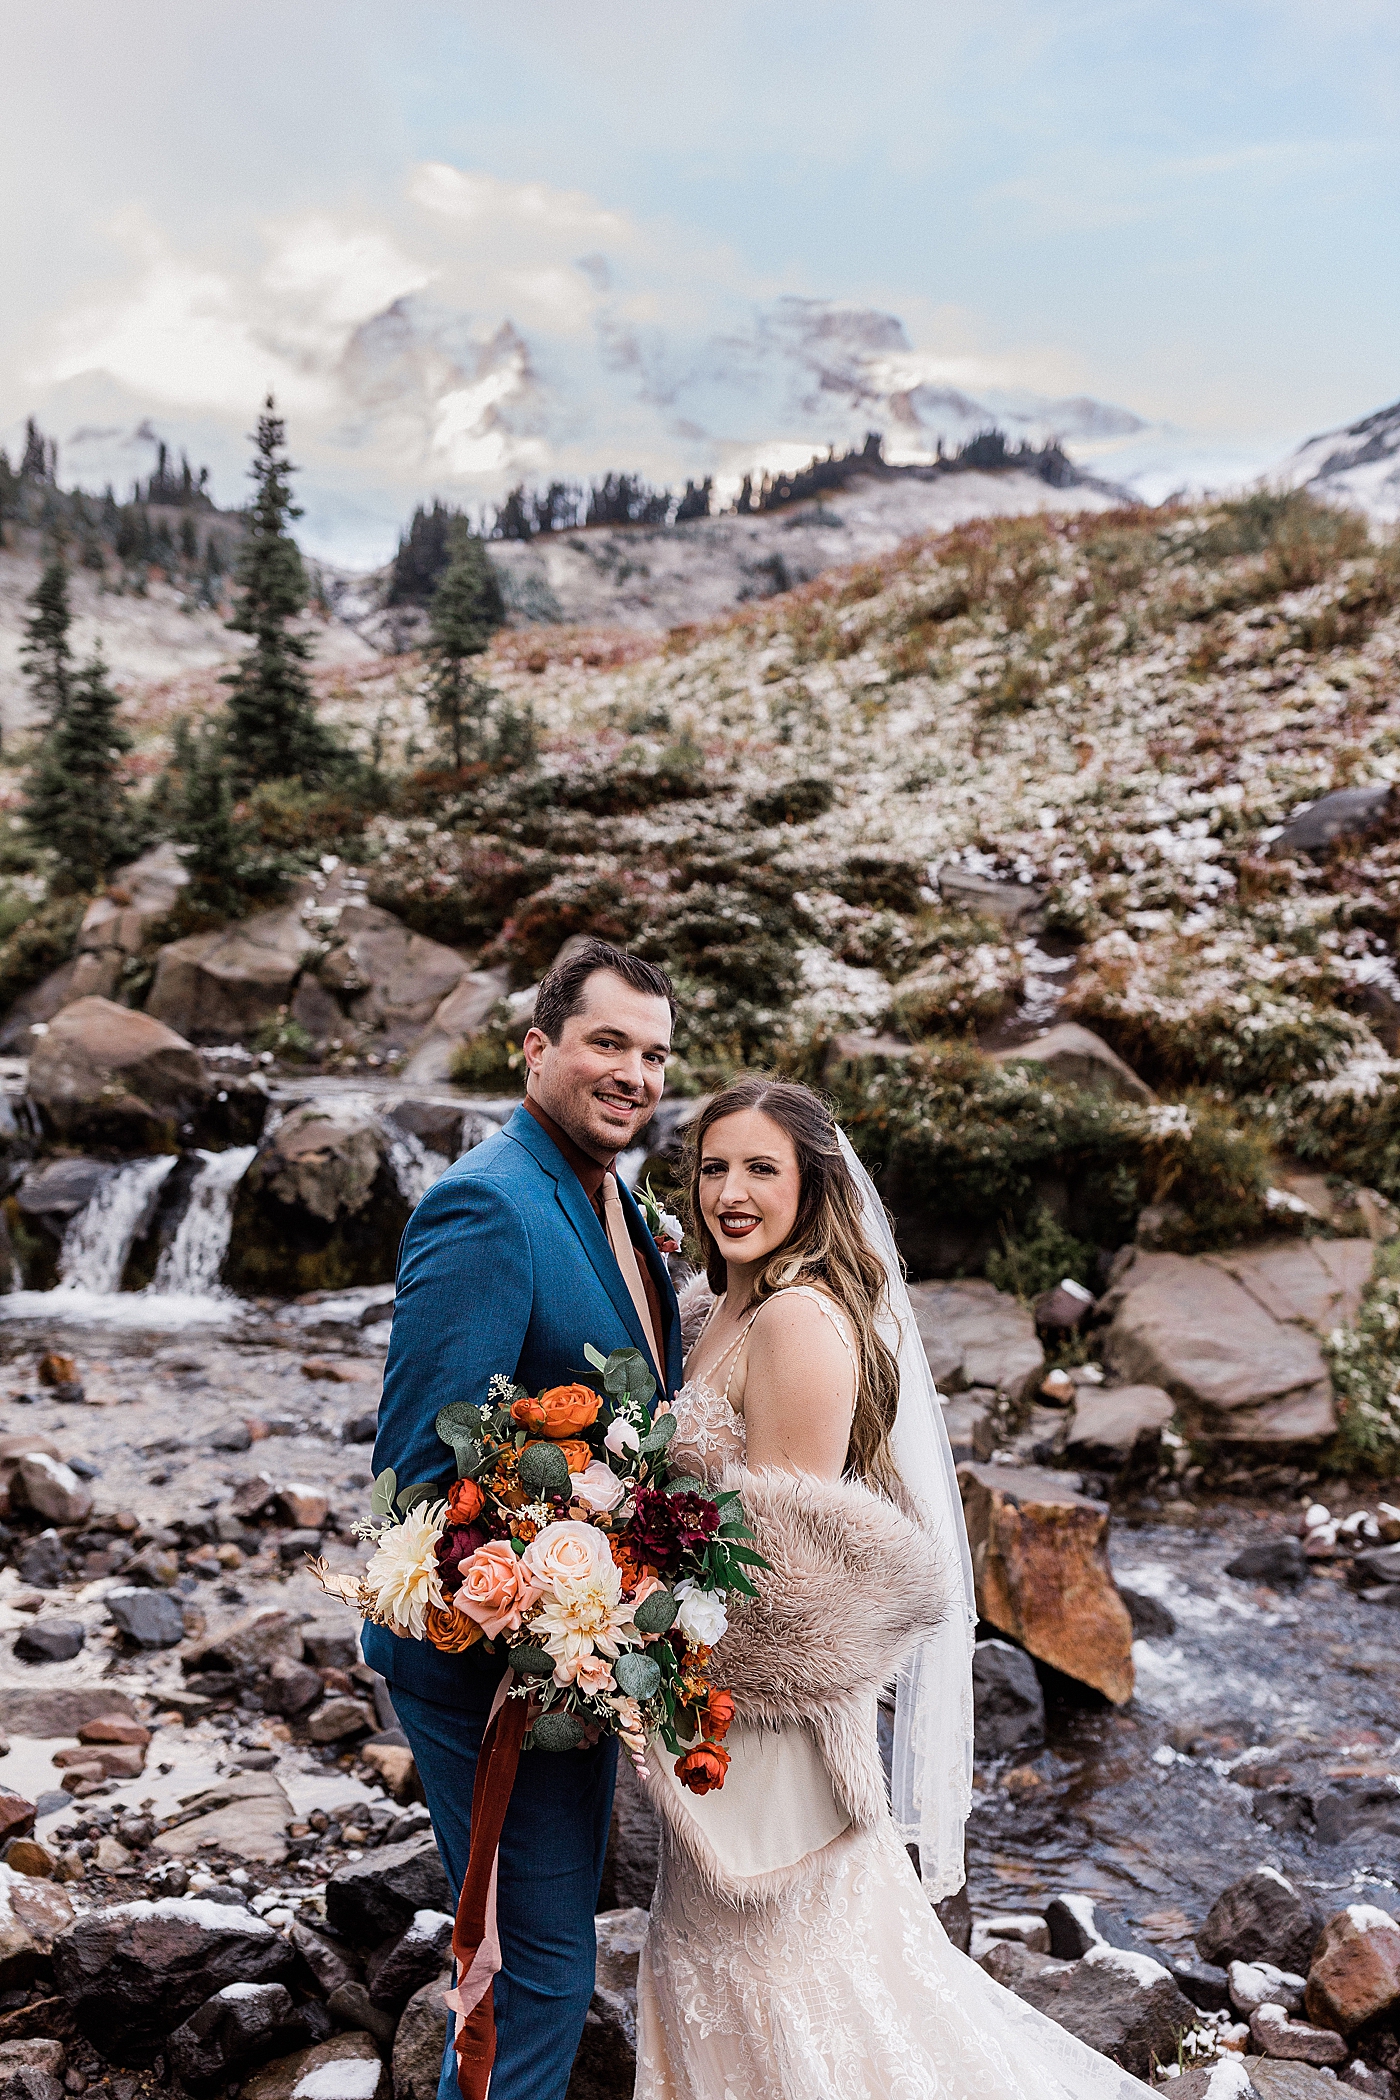 Bride and groom portraits after intimate ceremony at Mt Rainier | Megan Montalvo Photography